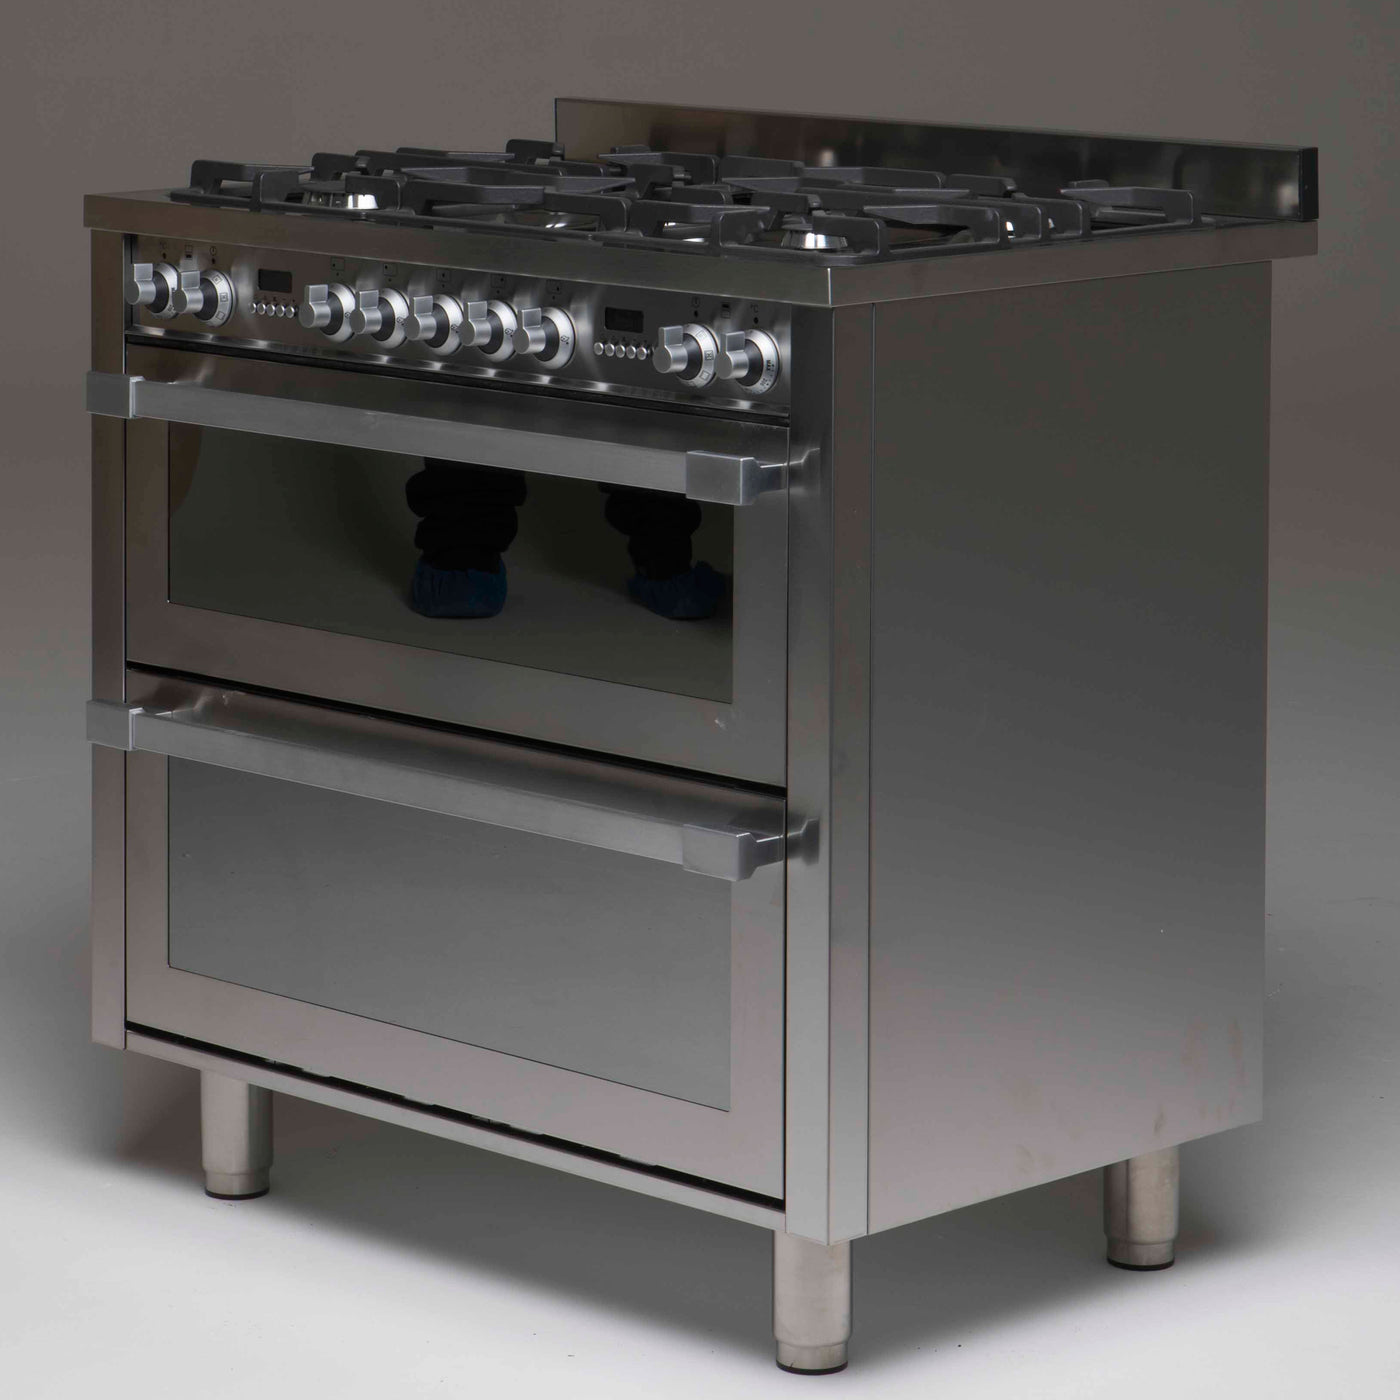 Double Freestanding Oven Anthracite